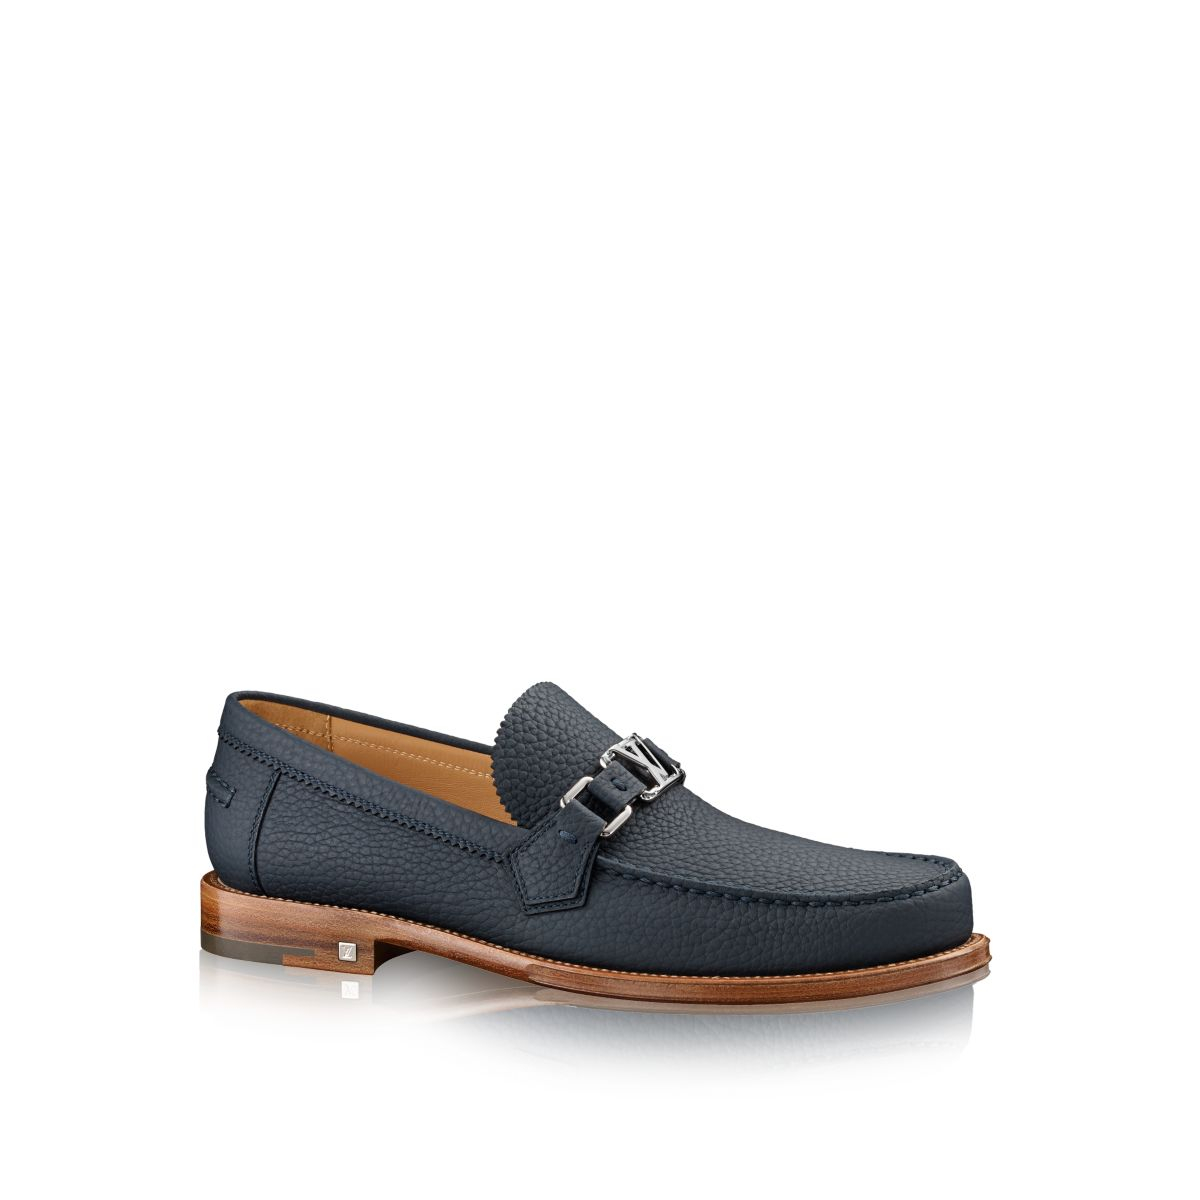 Louis Vuitton Loafers Price | Confederated Tribes of the Umatilla Indian Reservation